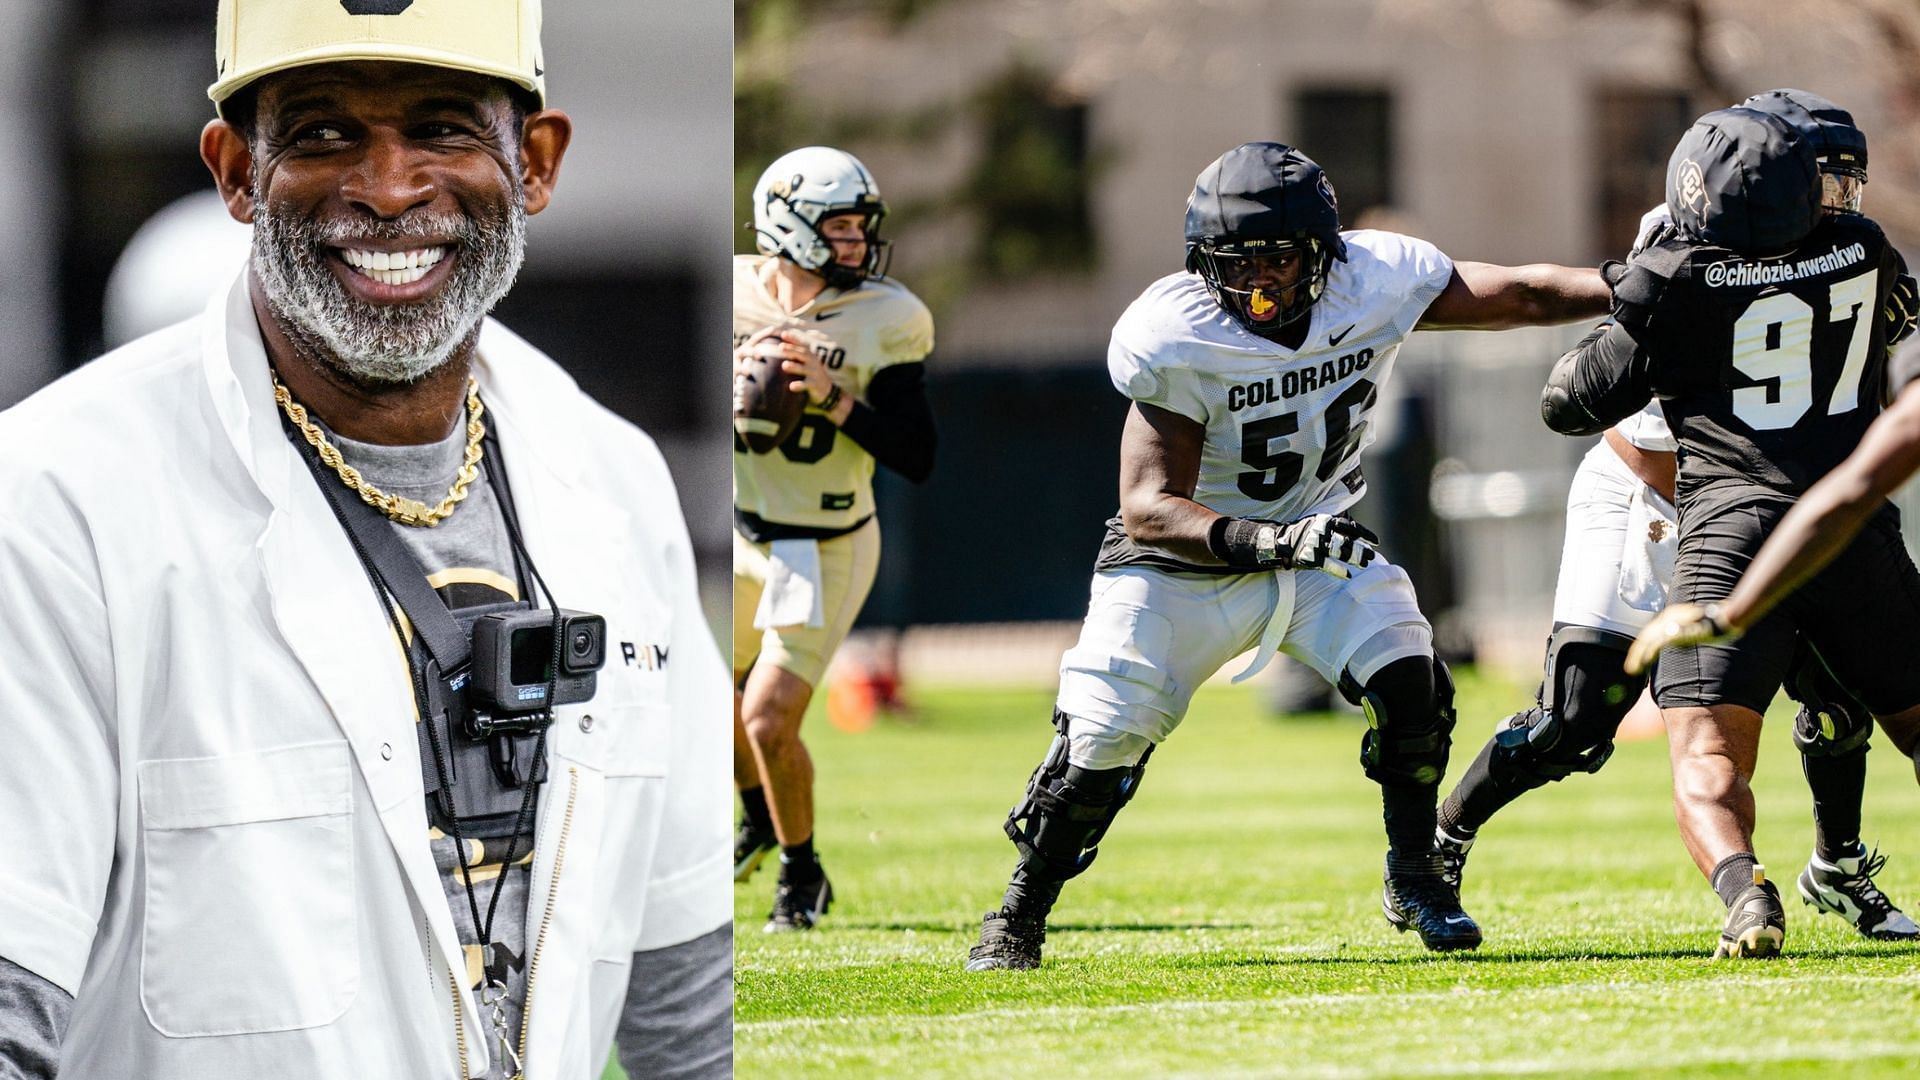 Deion Sanders and the Colorado Buffaloes have been predicted a poor season 